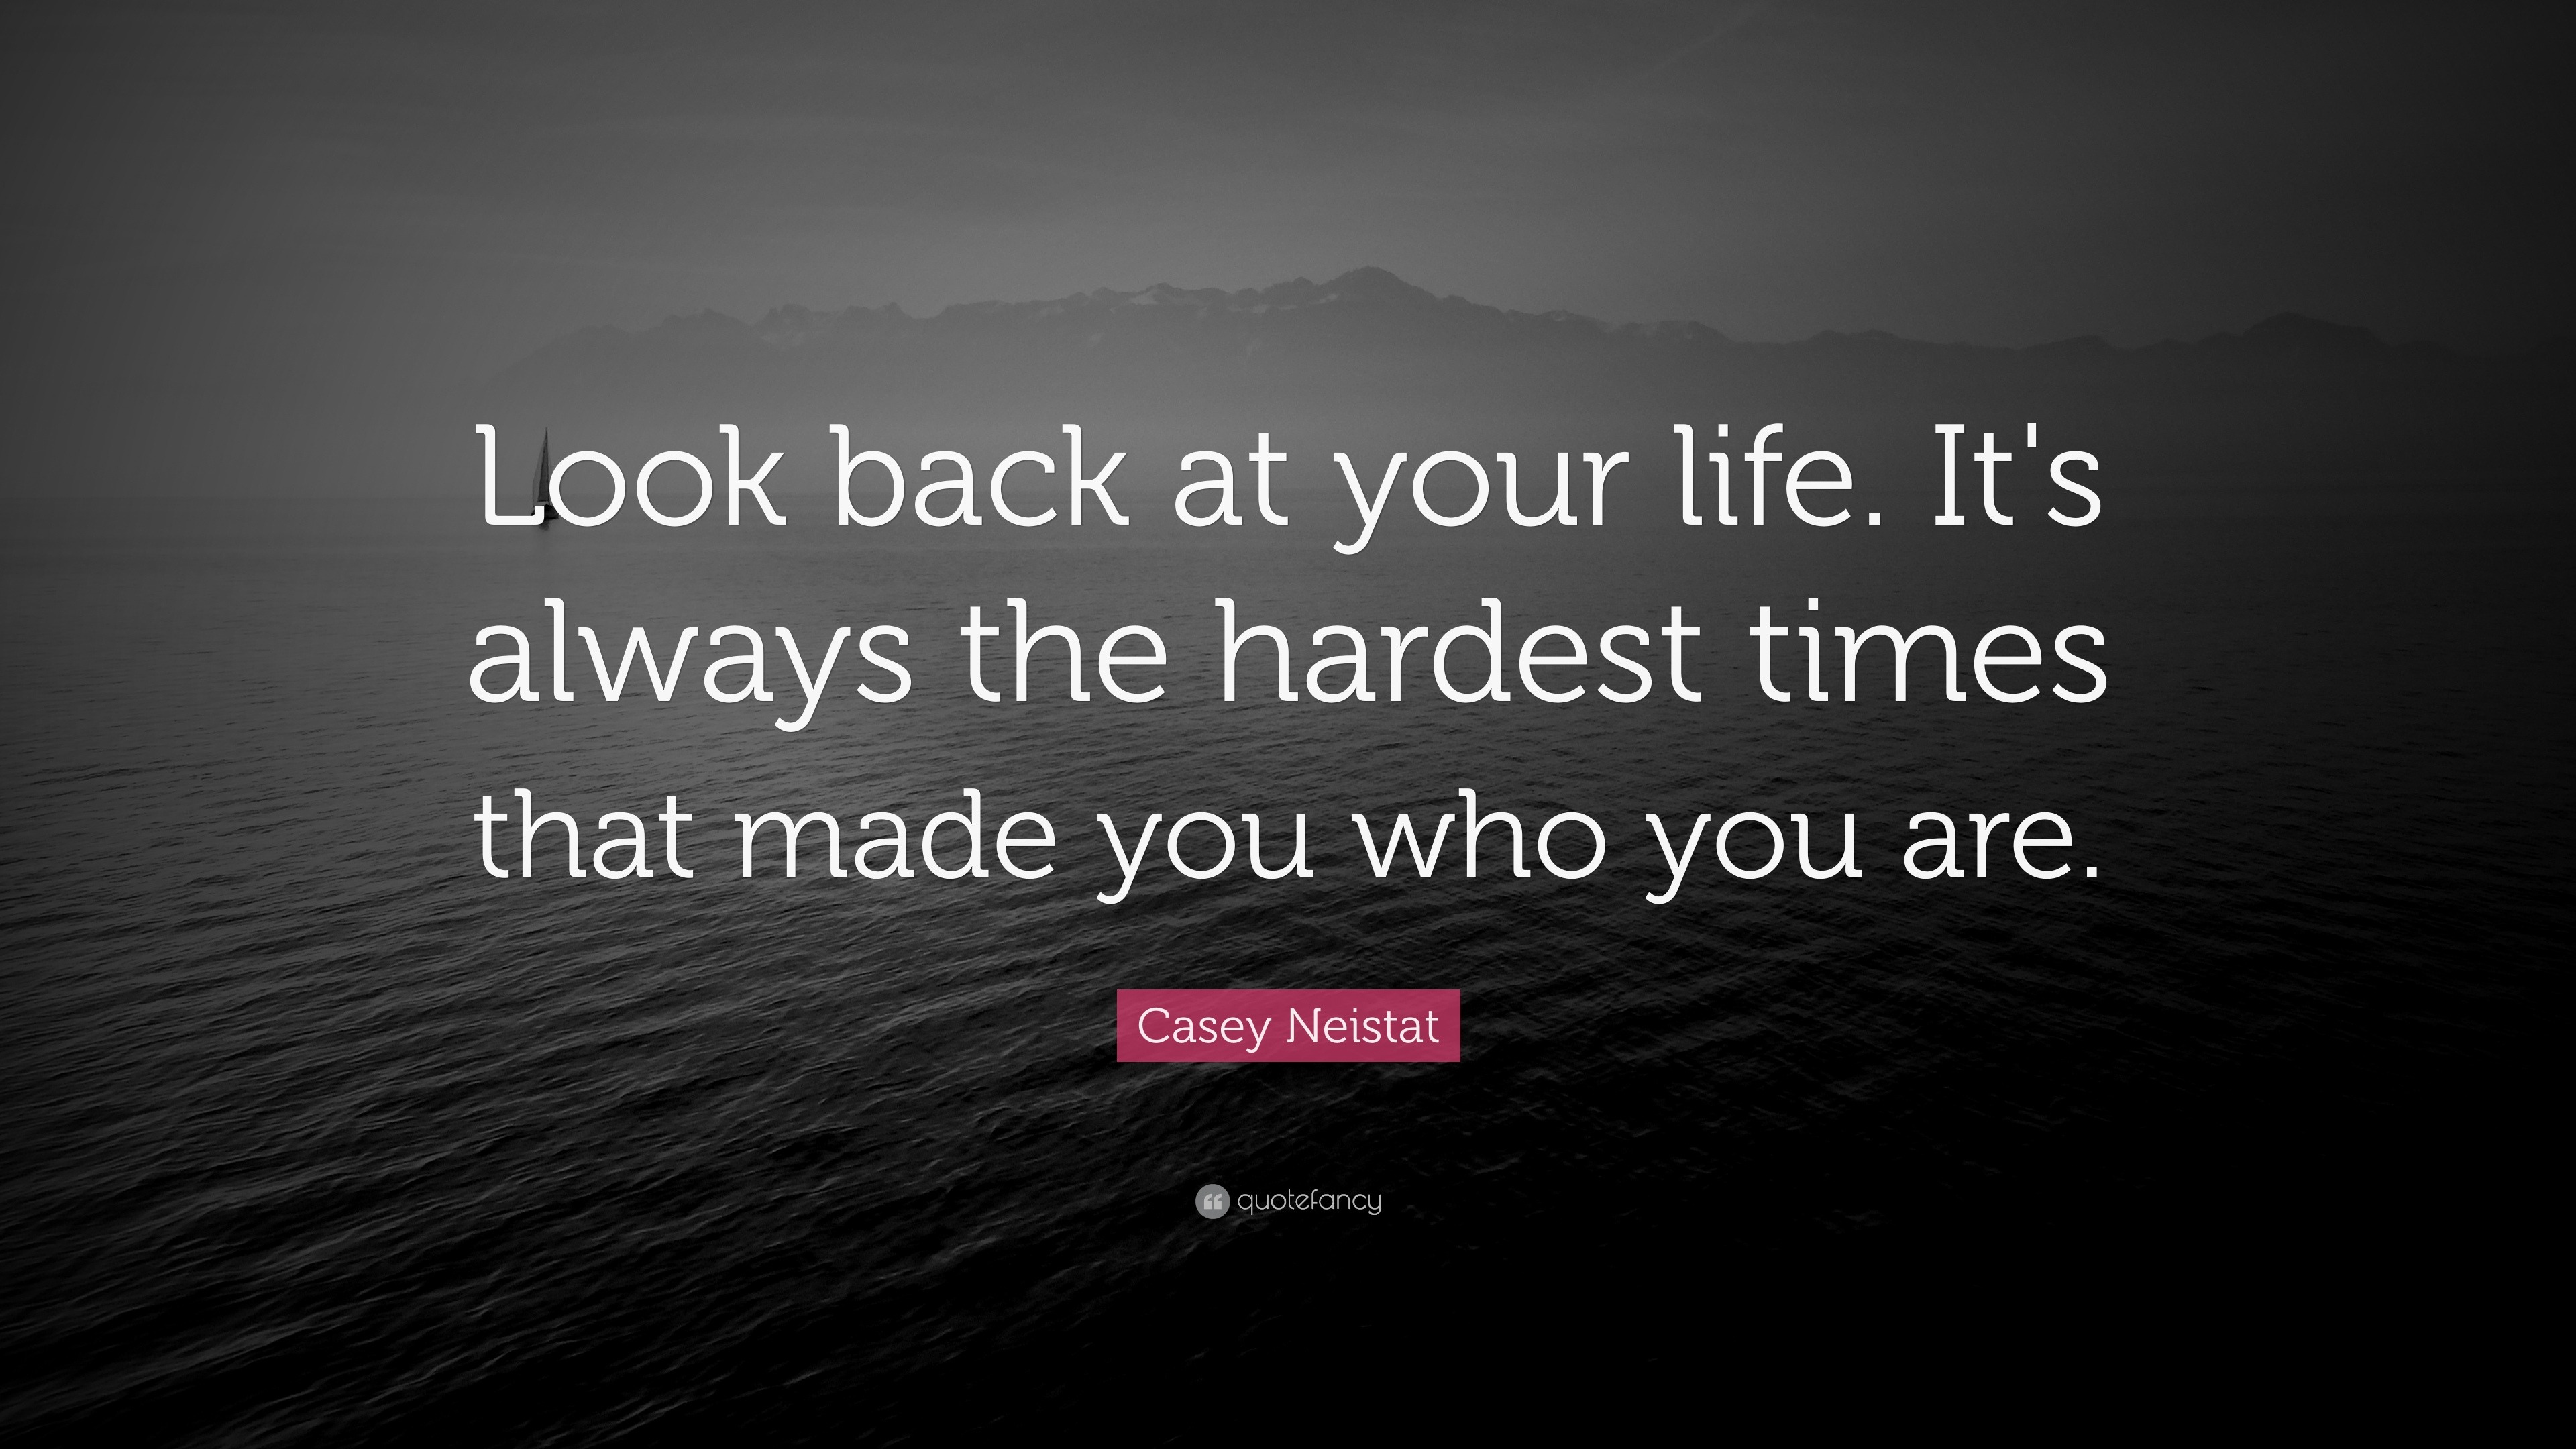 Casey Neistat Quote: "Look back at your life. It's always the hardest times that made you who ...